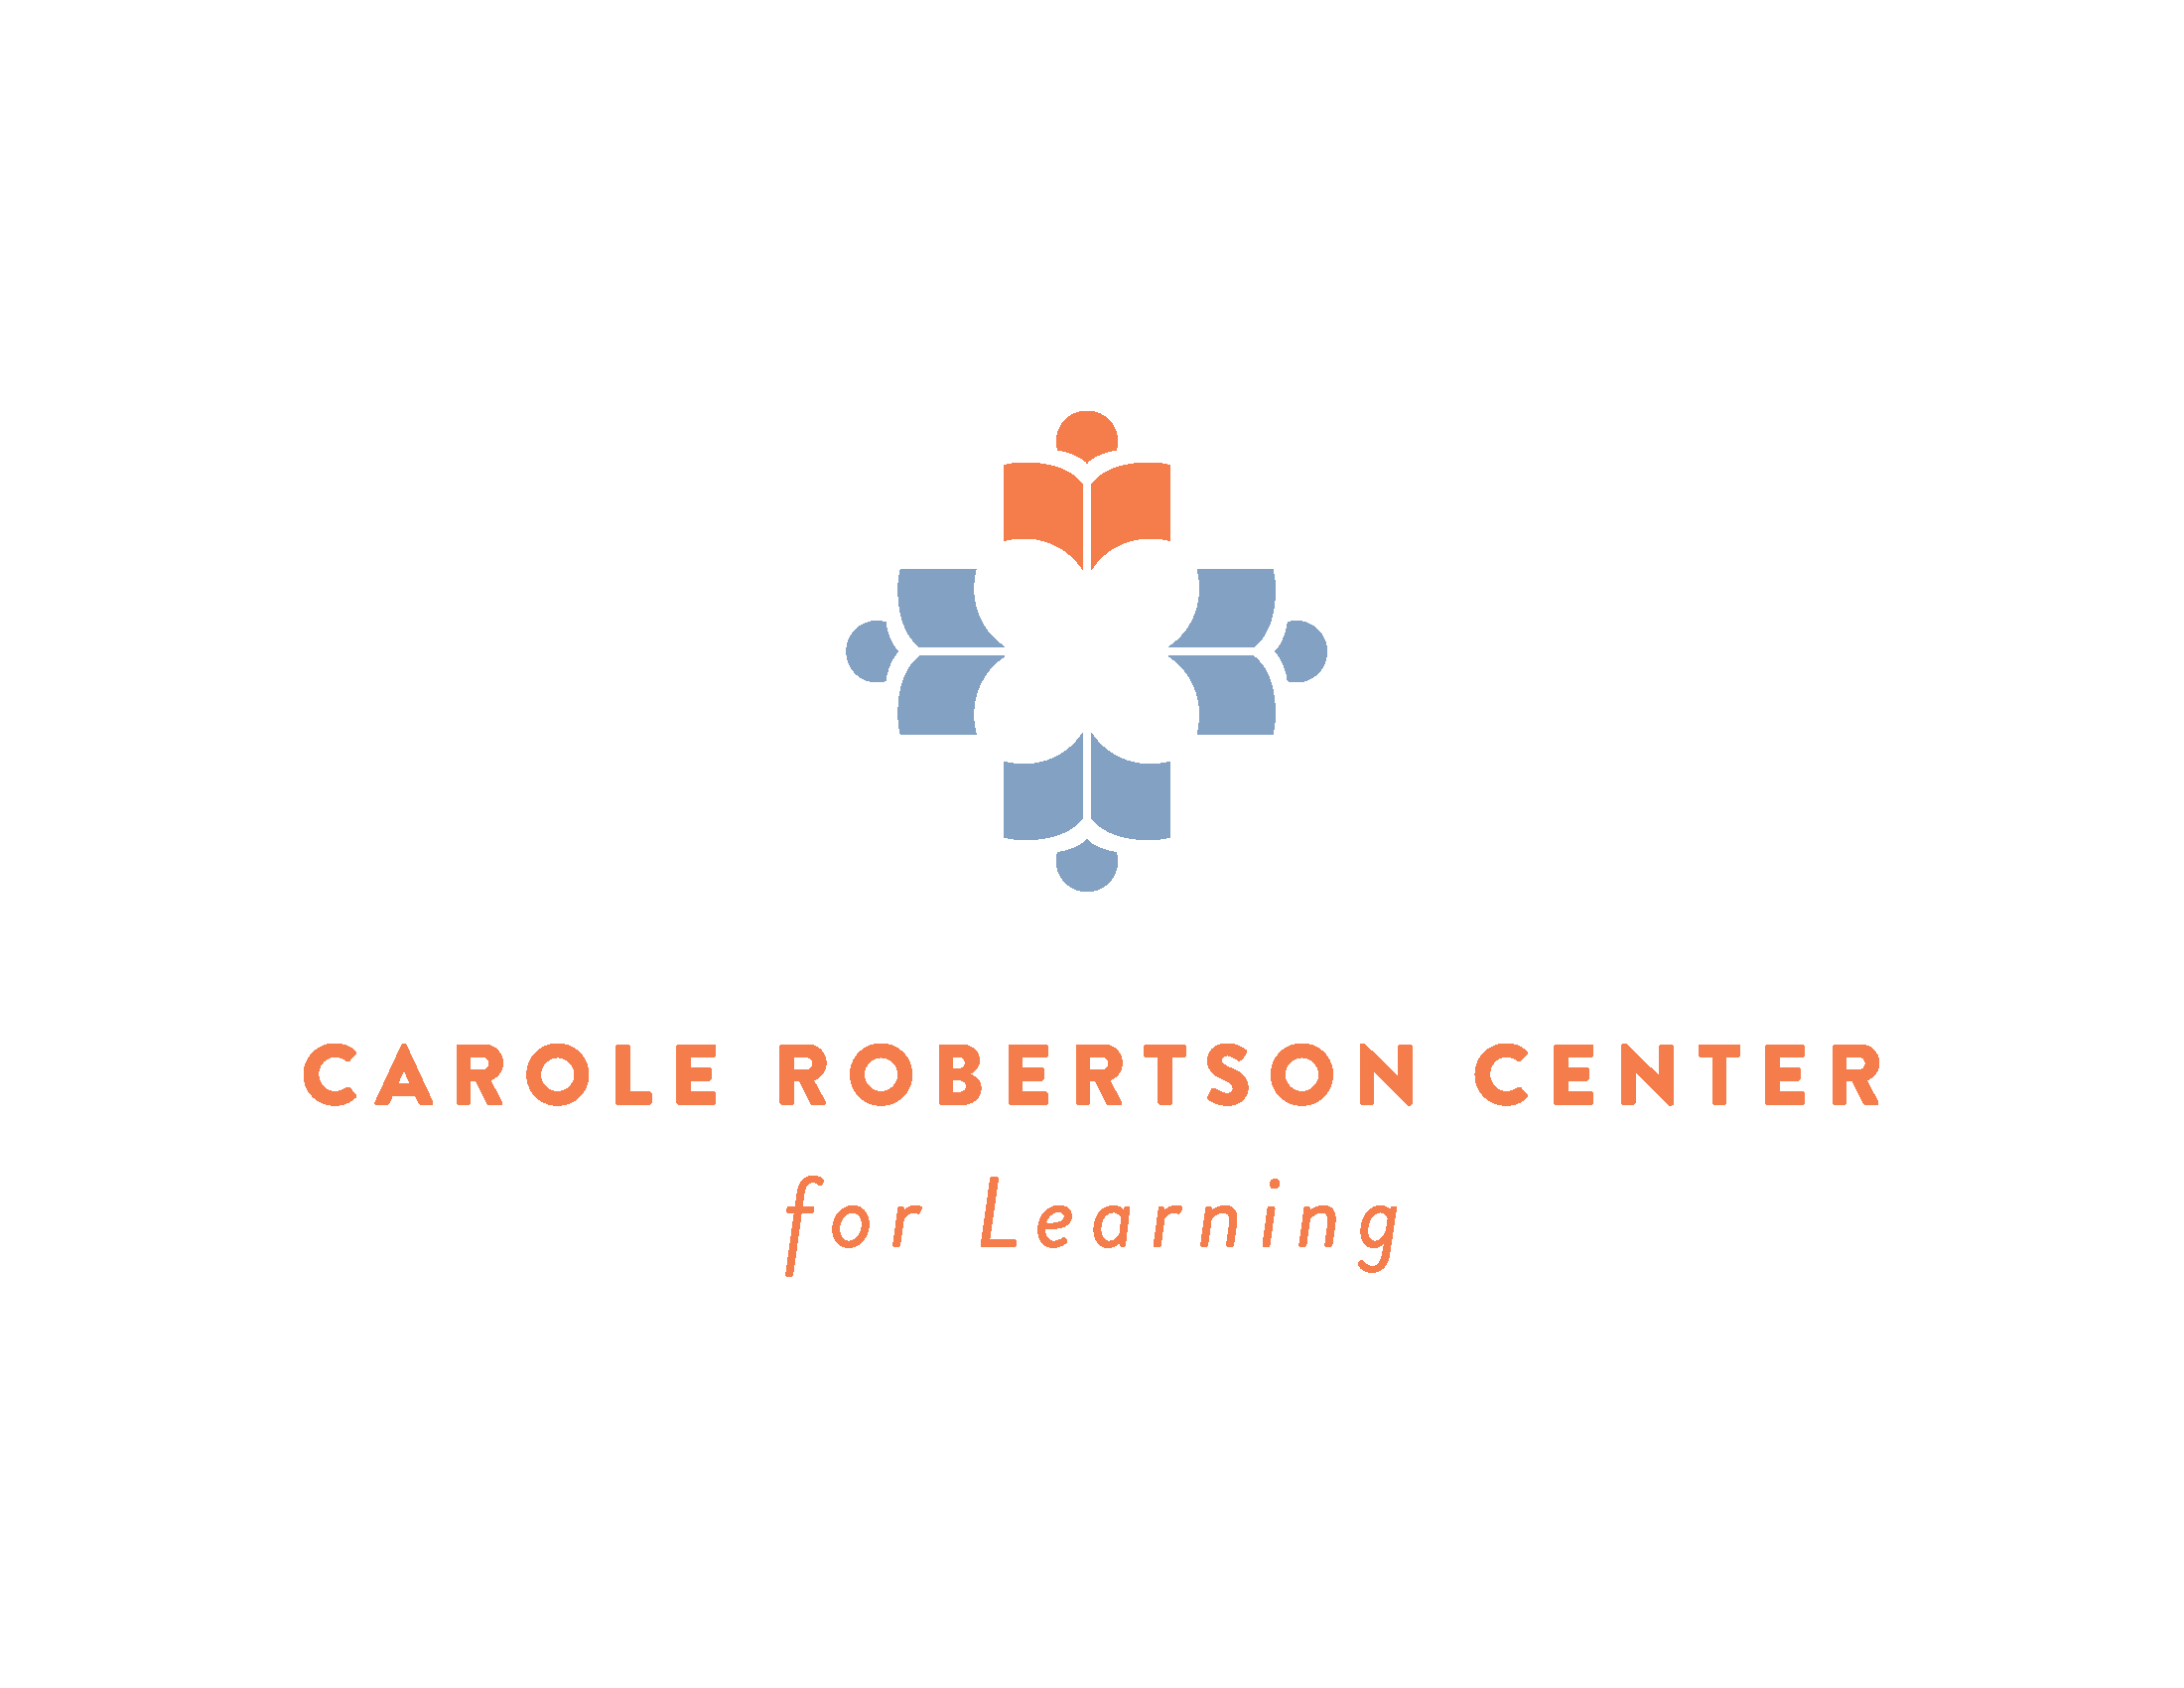 Carole Robertson Center for Learning